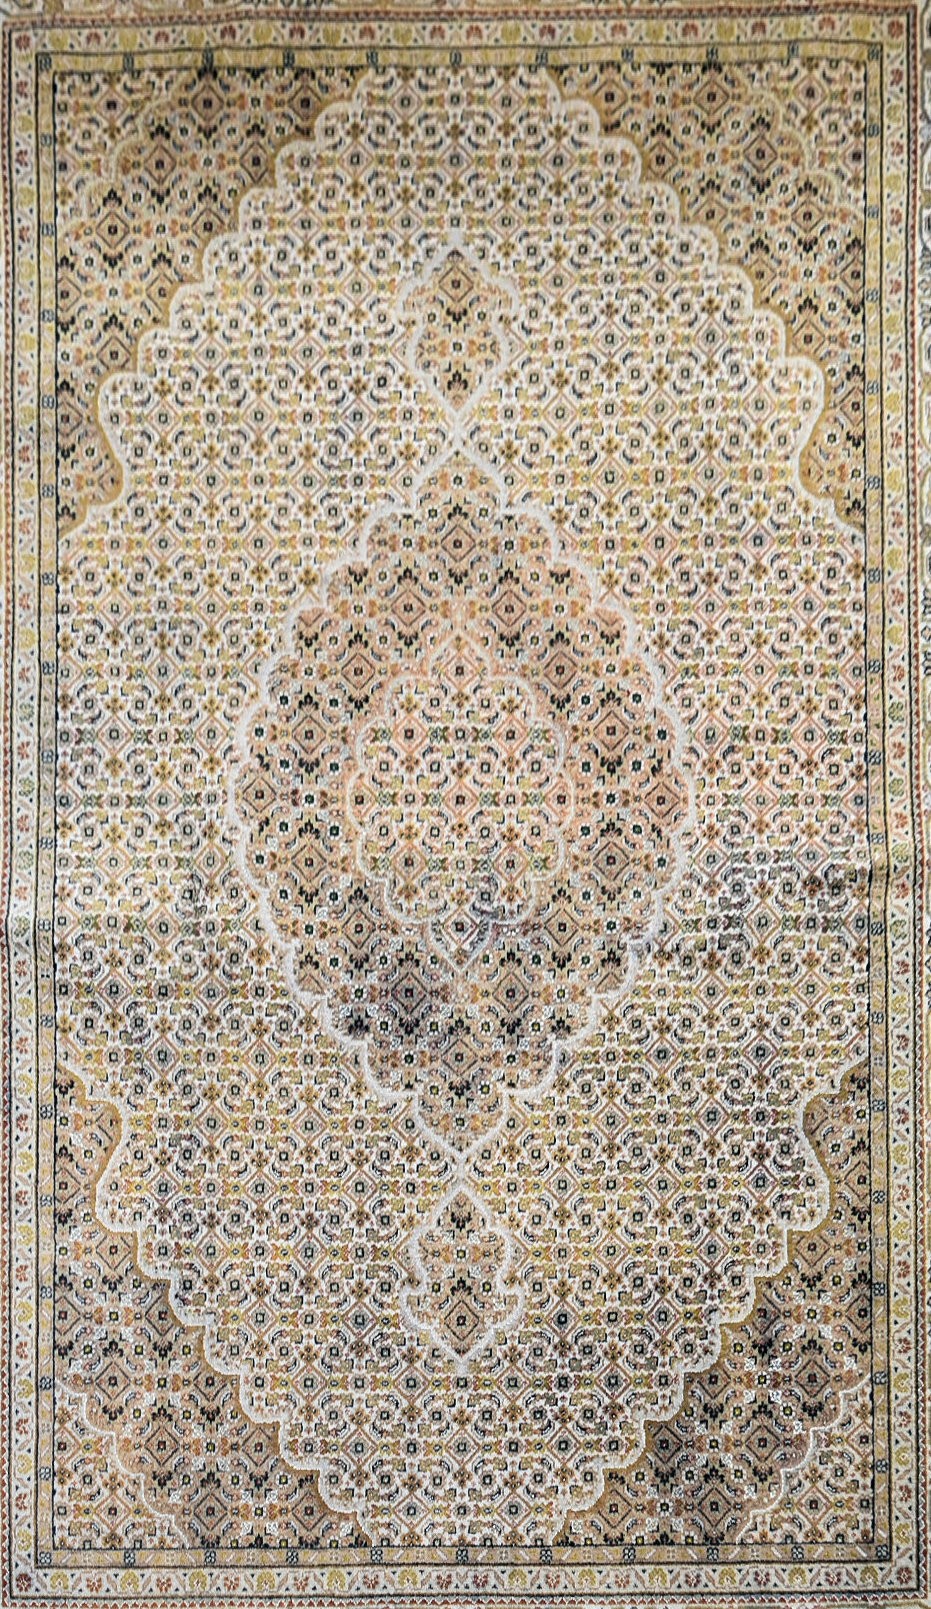 A silk & wool Tabriz style carpet with central medallion and repeating floral design across the fawn - Image 2 of 4